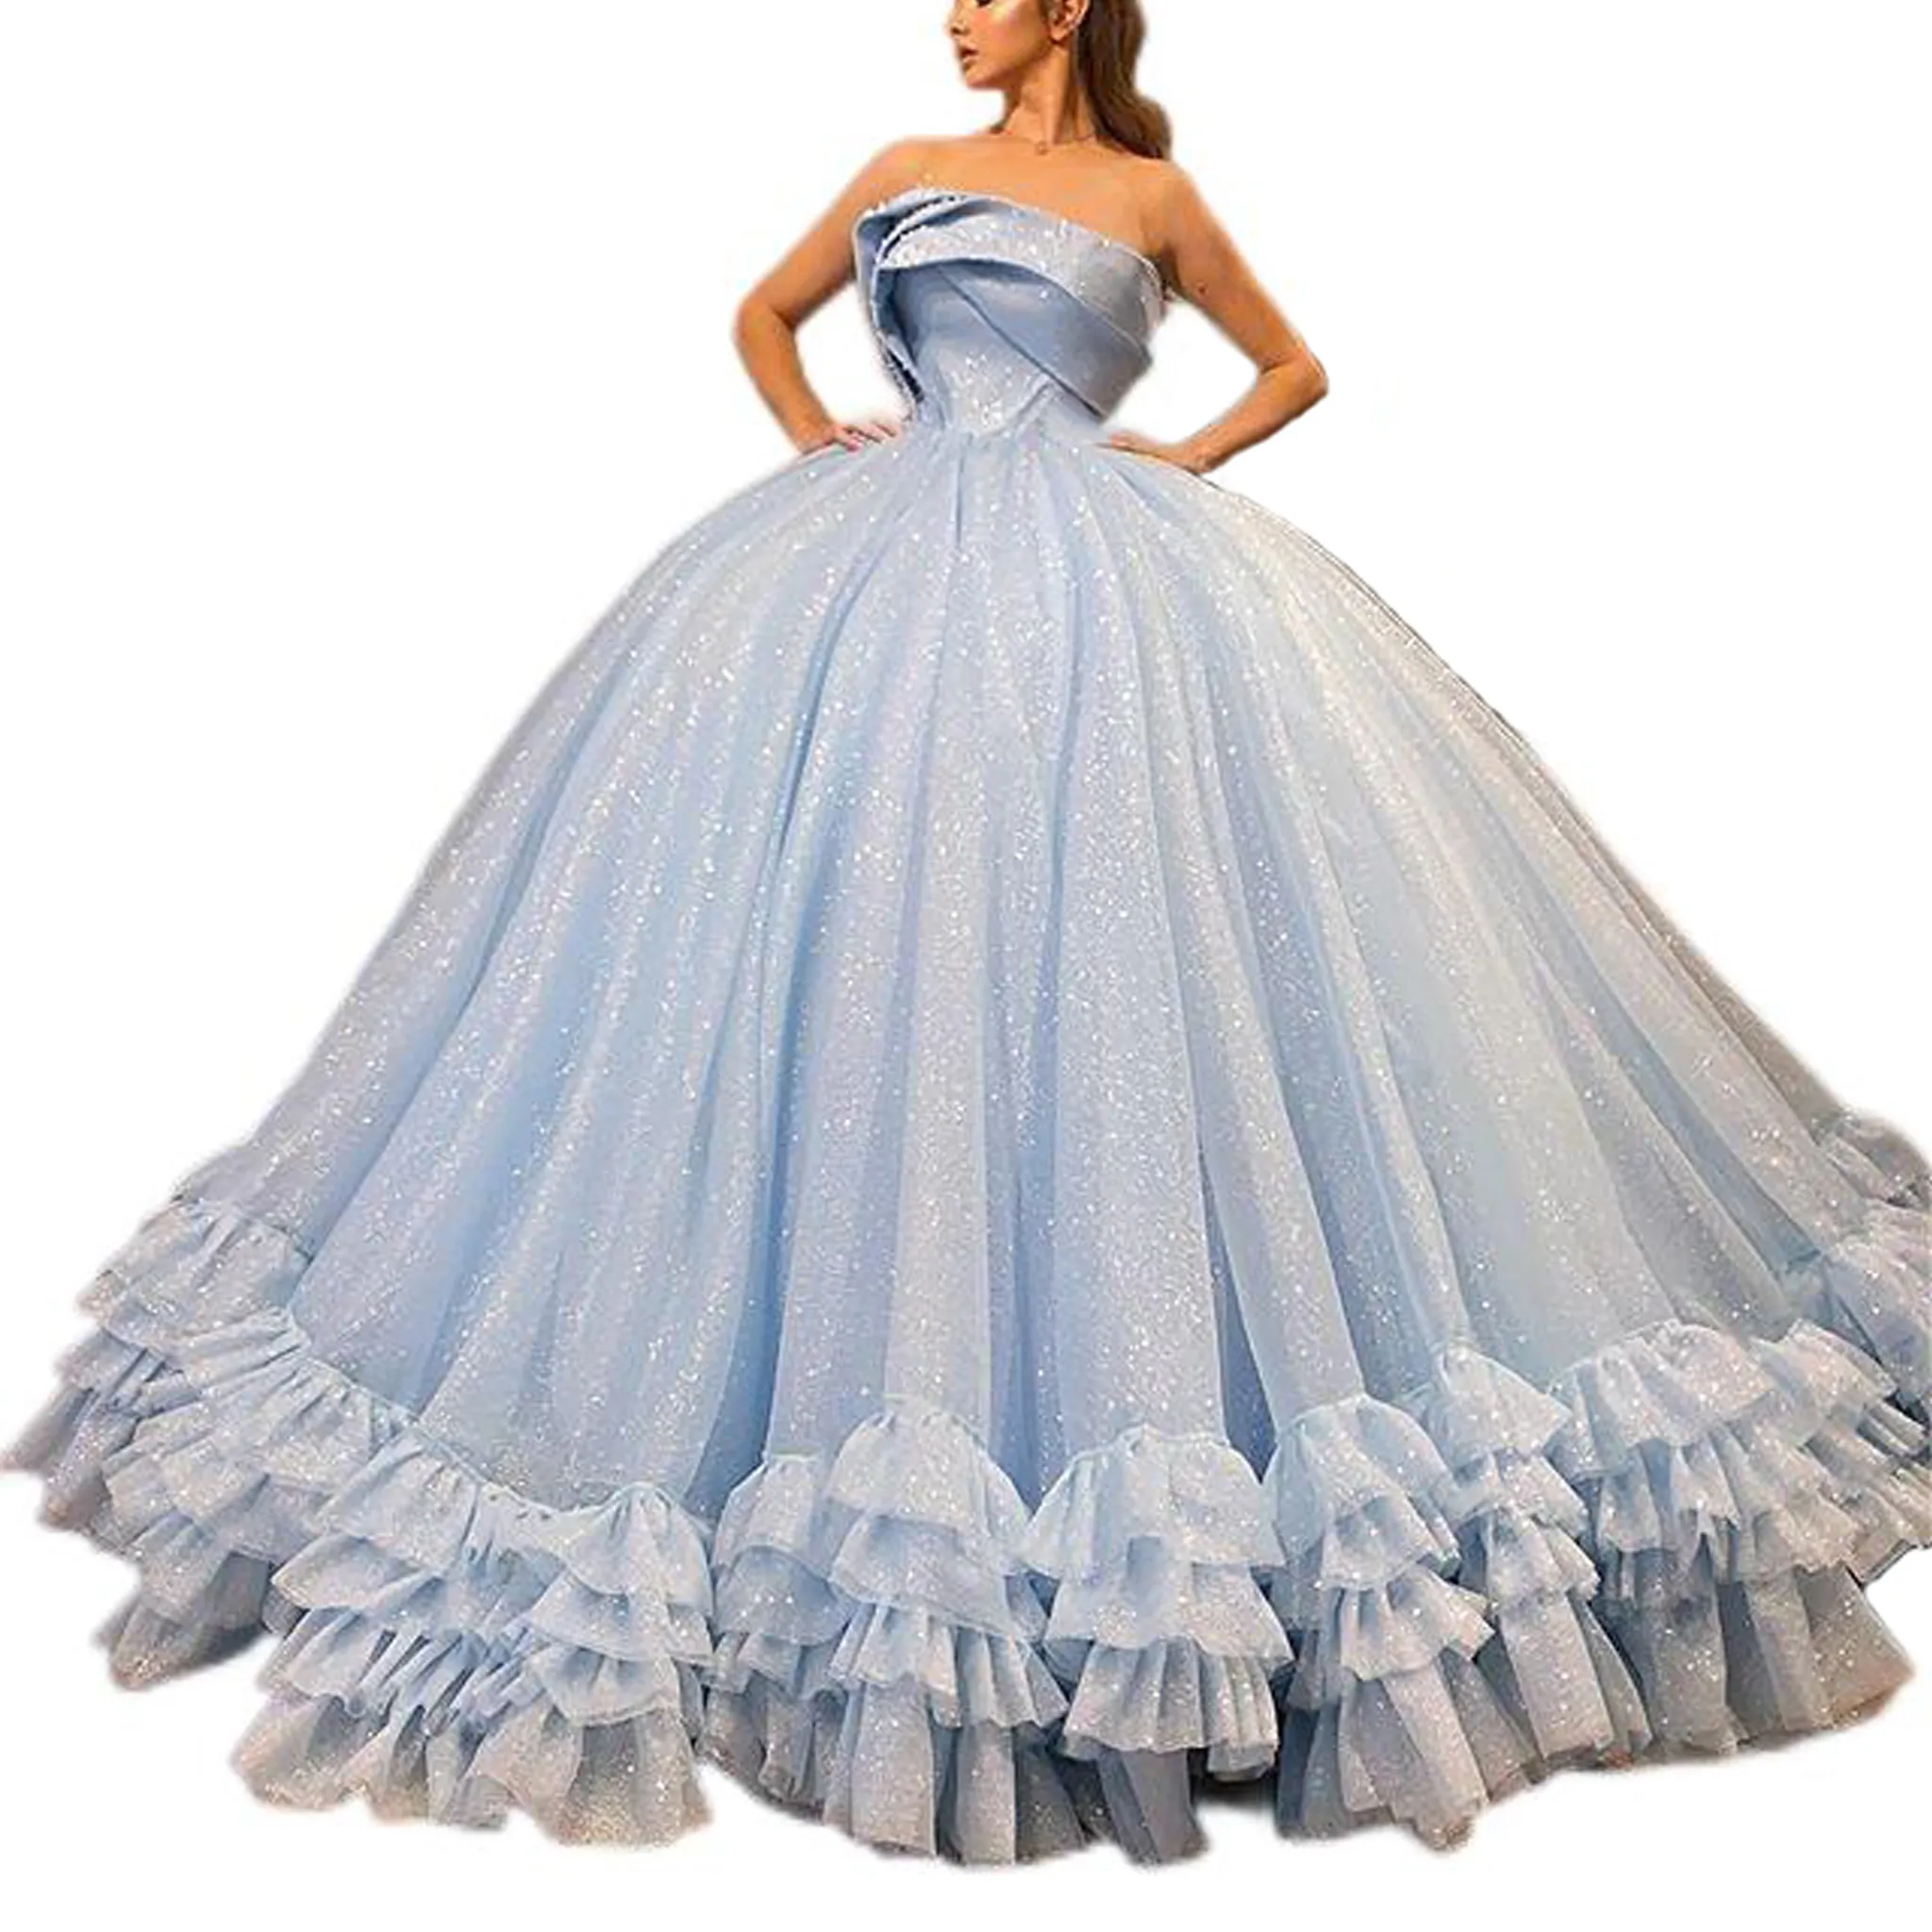 Asymmetrical Neck Sparkly Layered Blue Strapless Ball Gown Quinceanera Dresses Evening Dress Masquerade Ball Gown